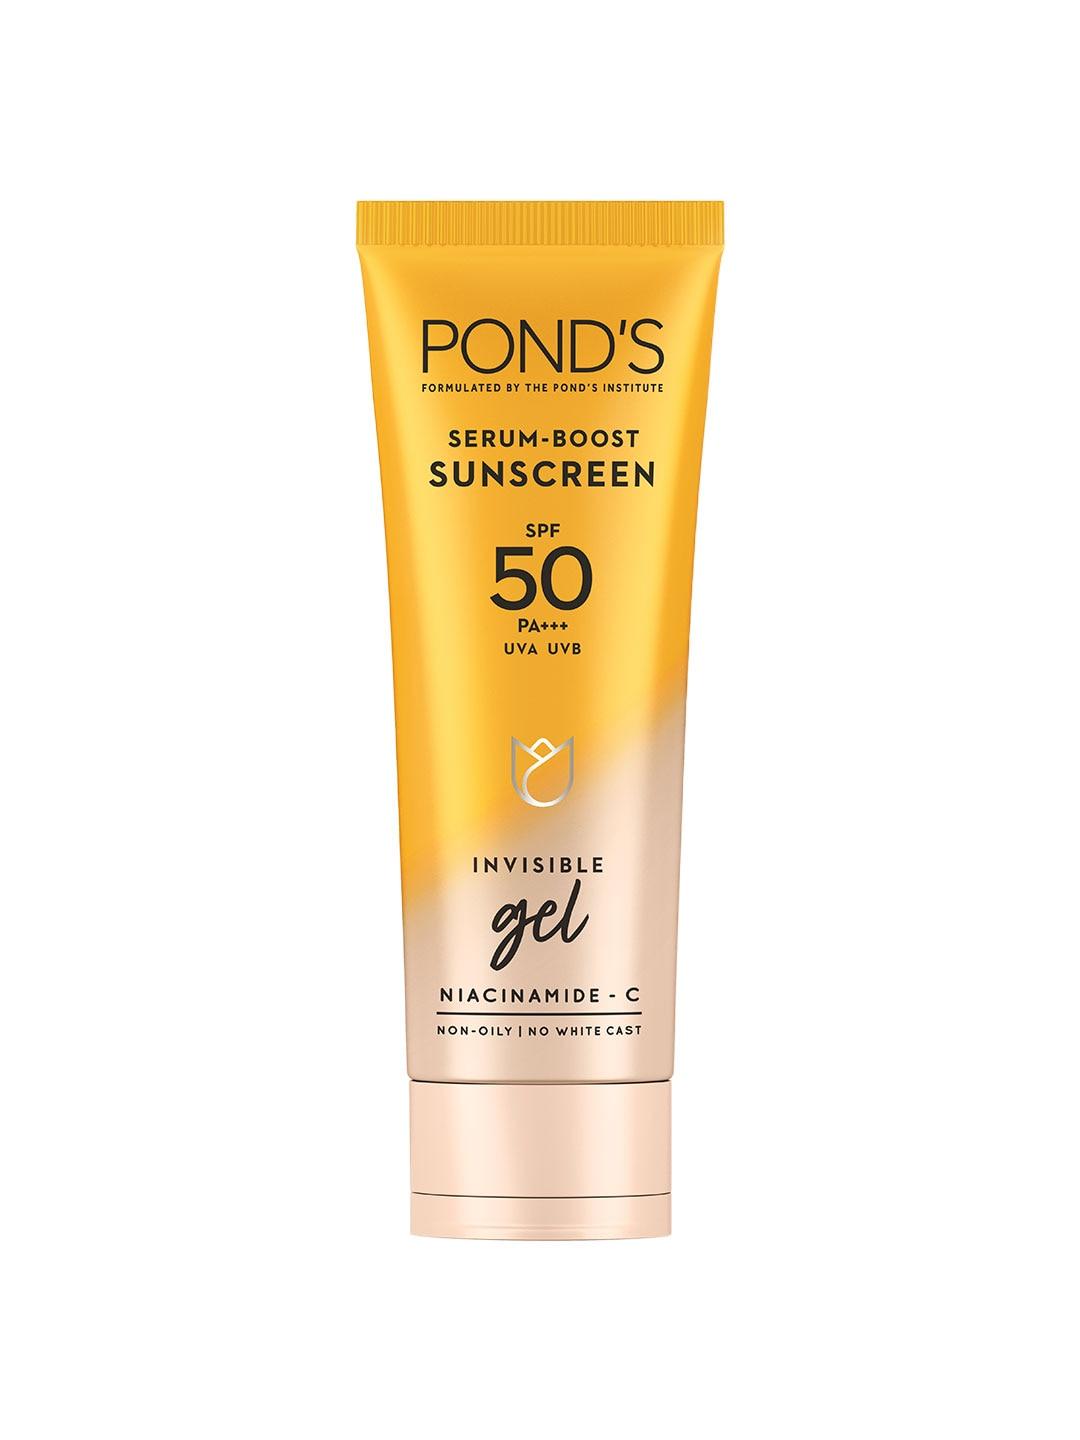 Ponds SPF 50 PA++ UVA UVB Serum Boost Invisible Gel Sunscreen with Niacinamide C -100g